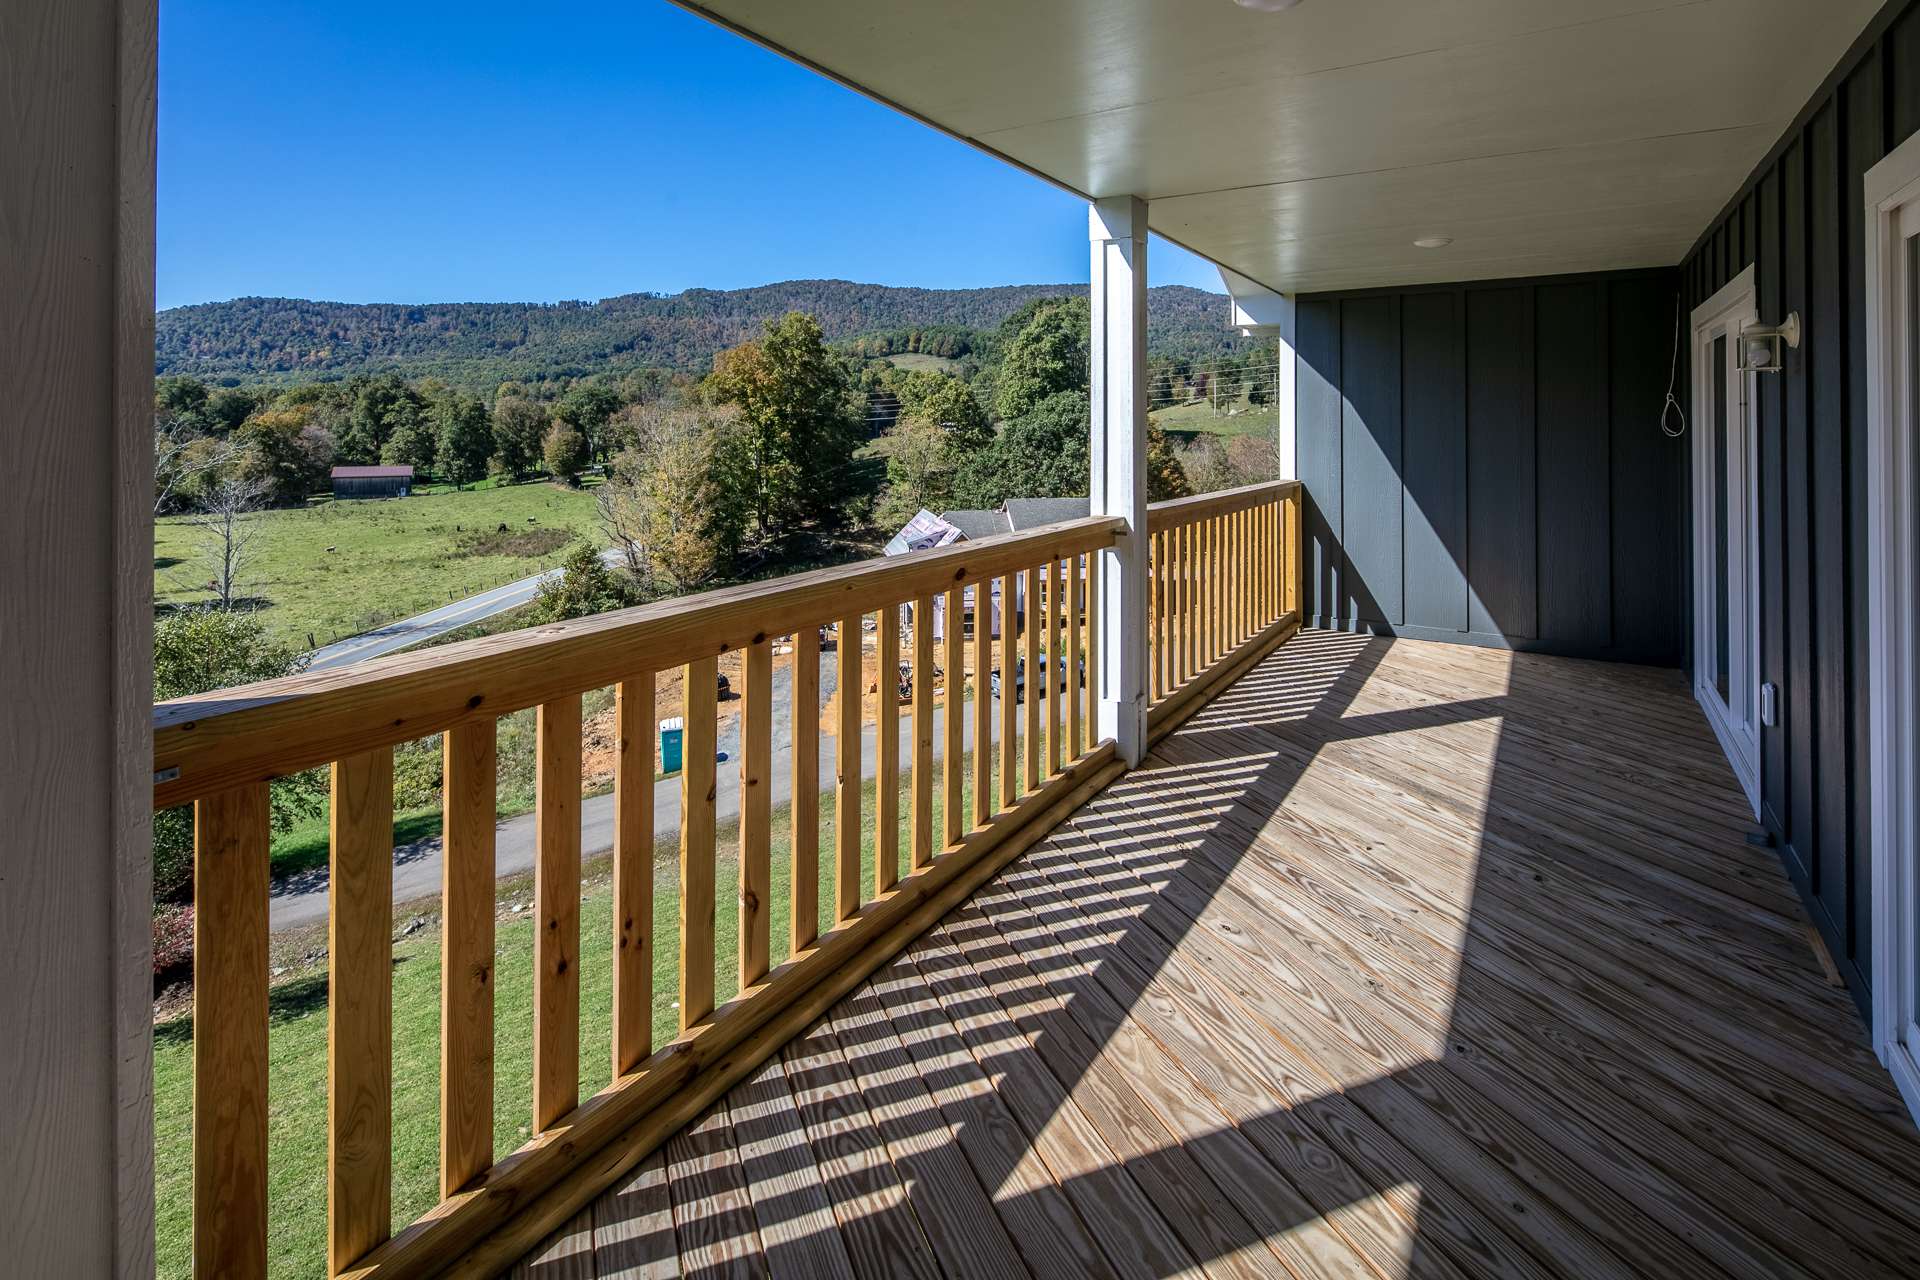 Here you can enjoy panoramic views of surrounding pastures and mountains.